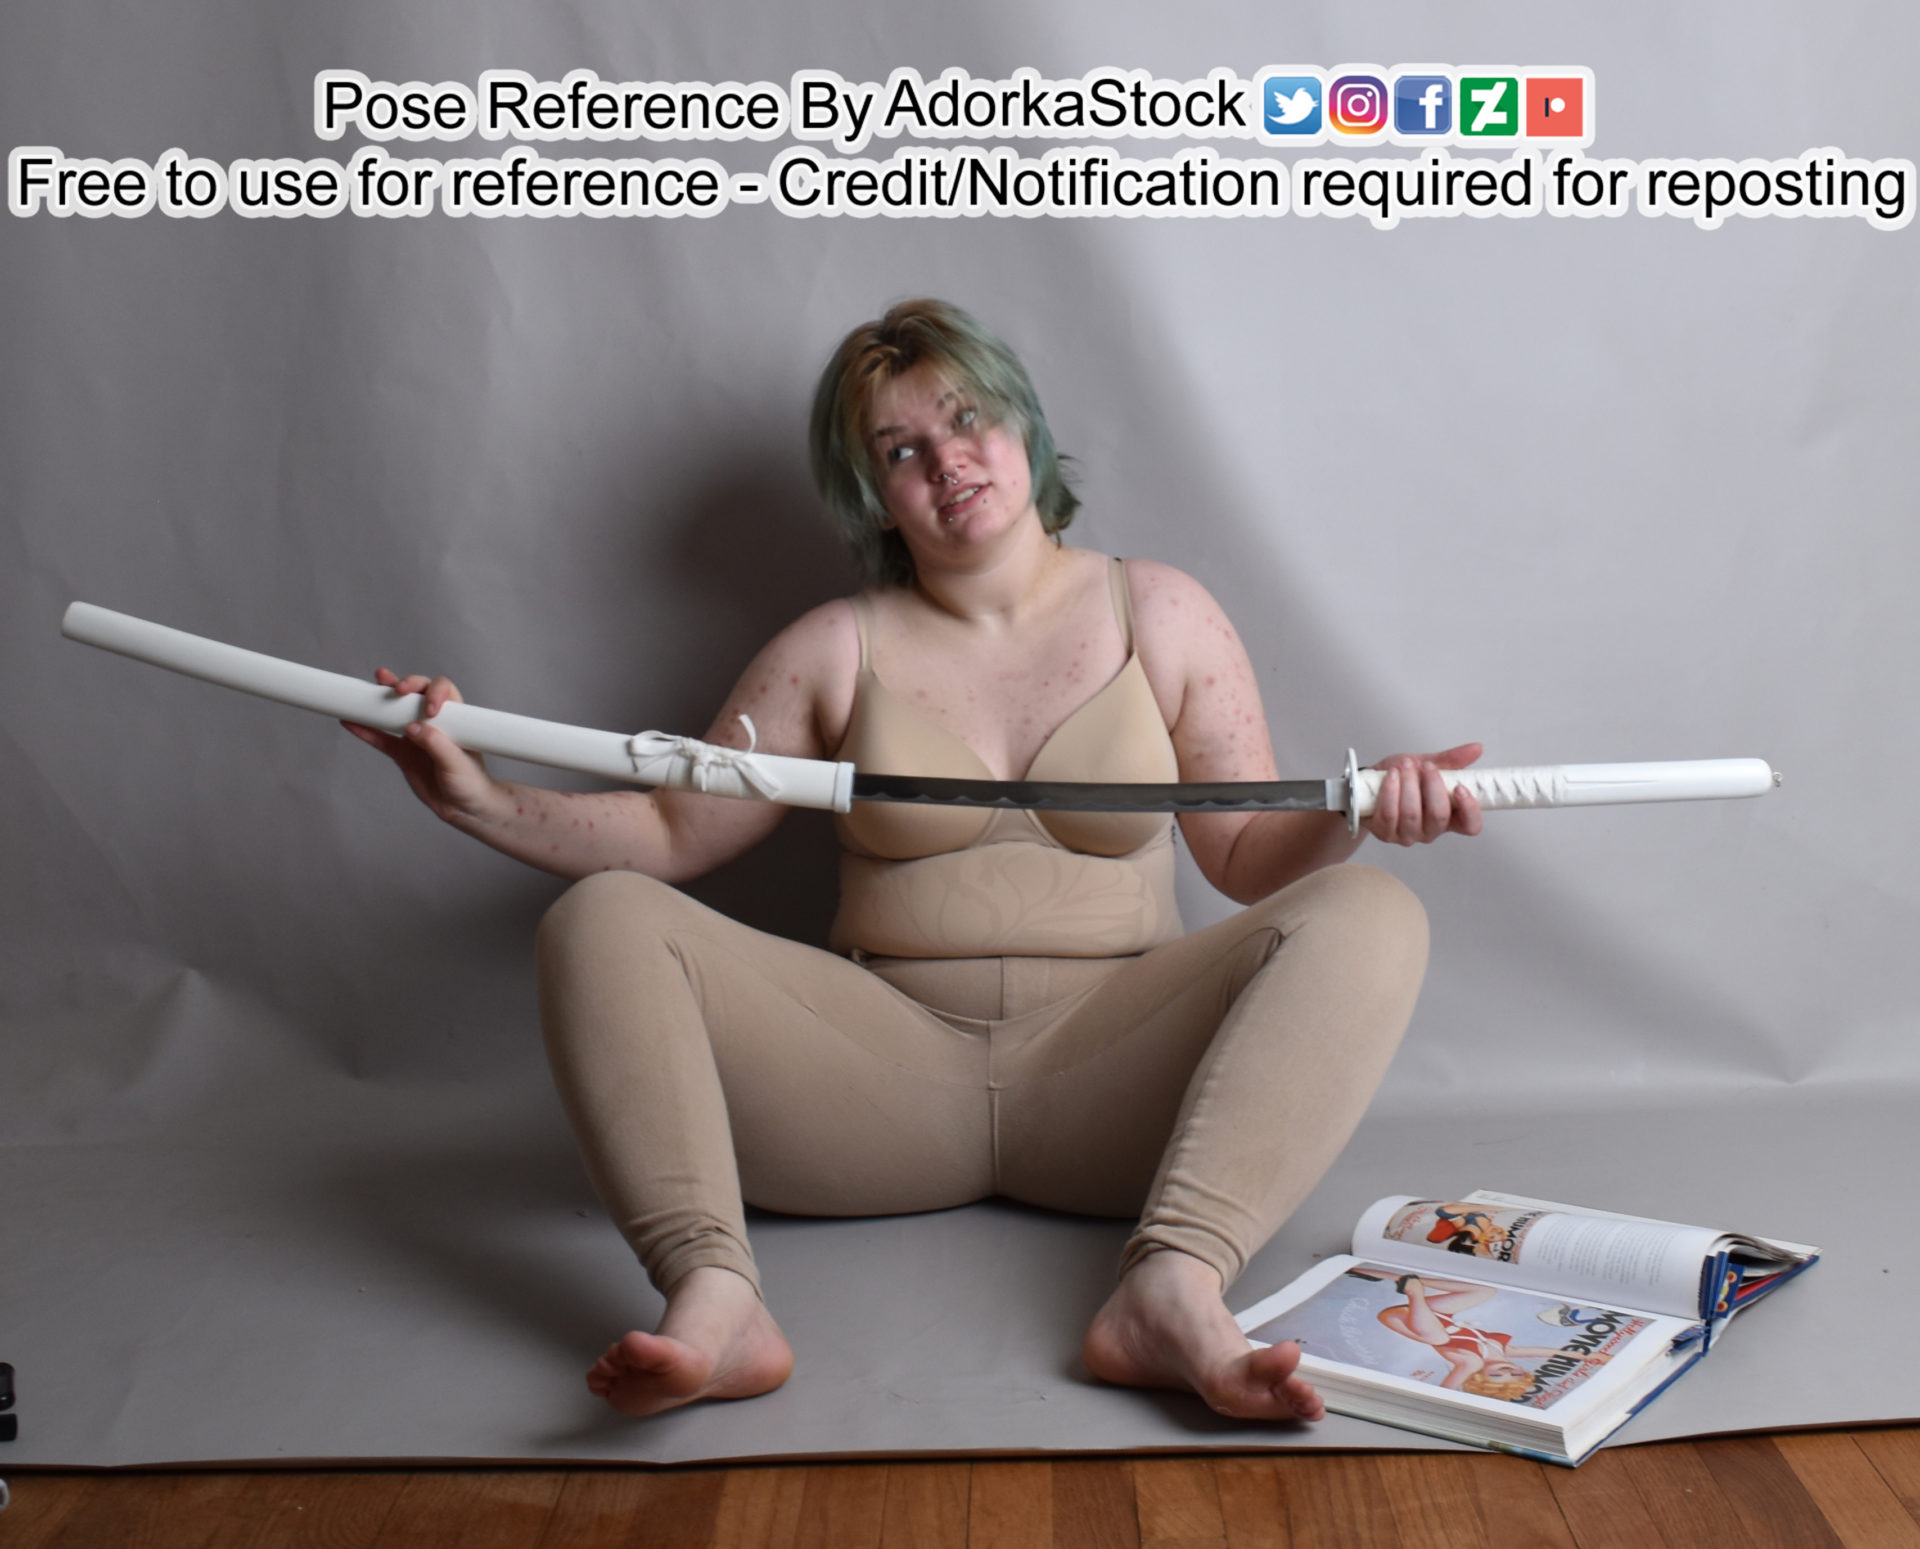 Pose reference model sitting on the floor unsheathing a katana looking suspicious